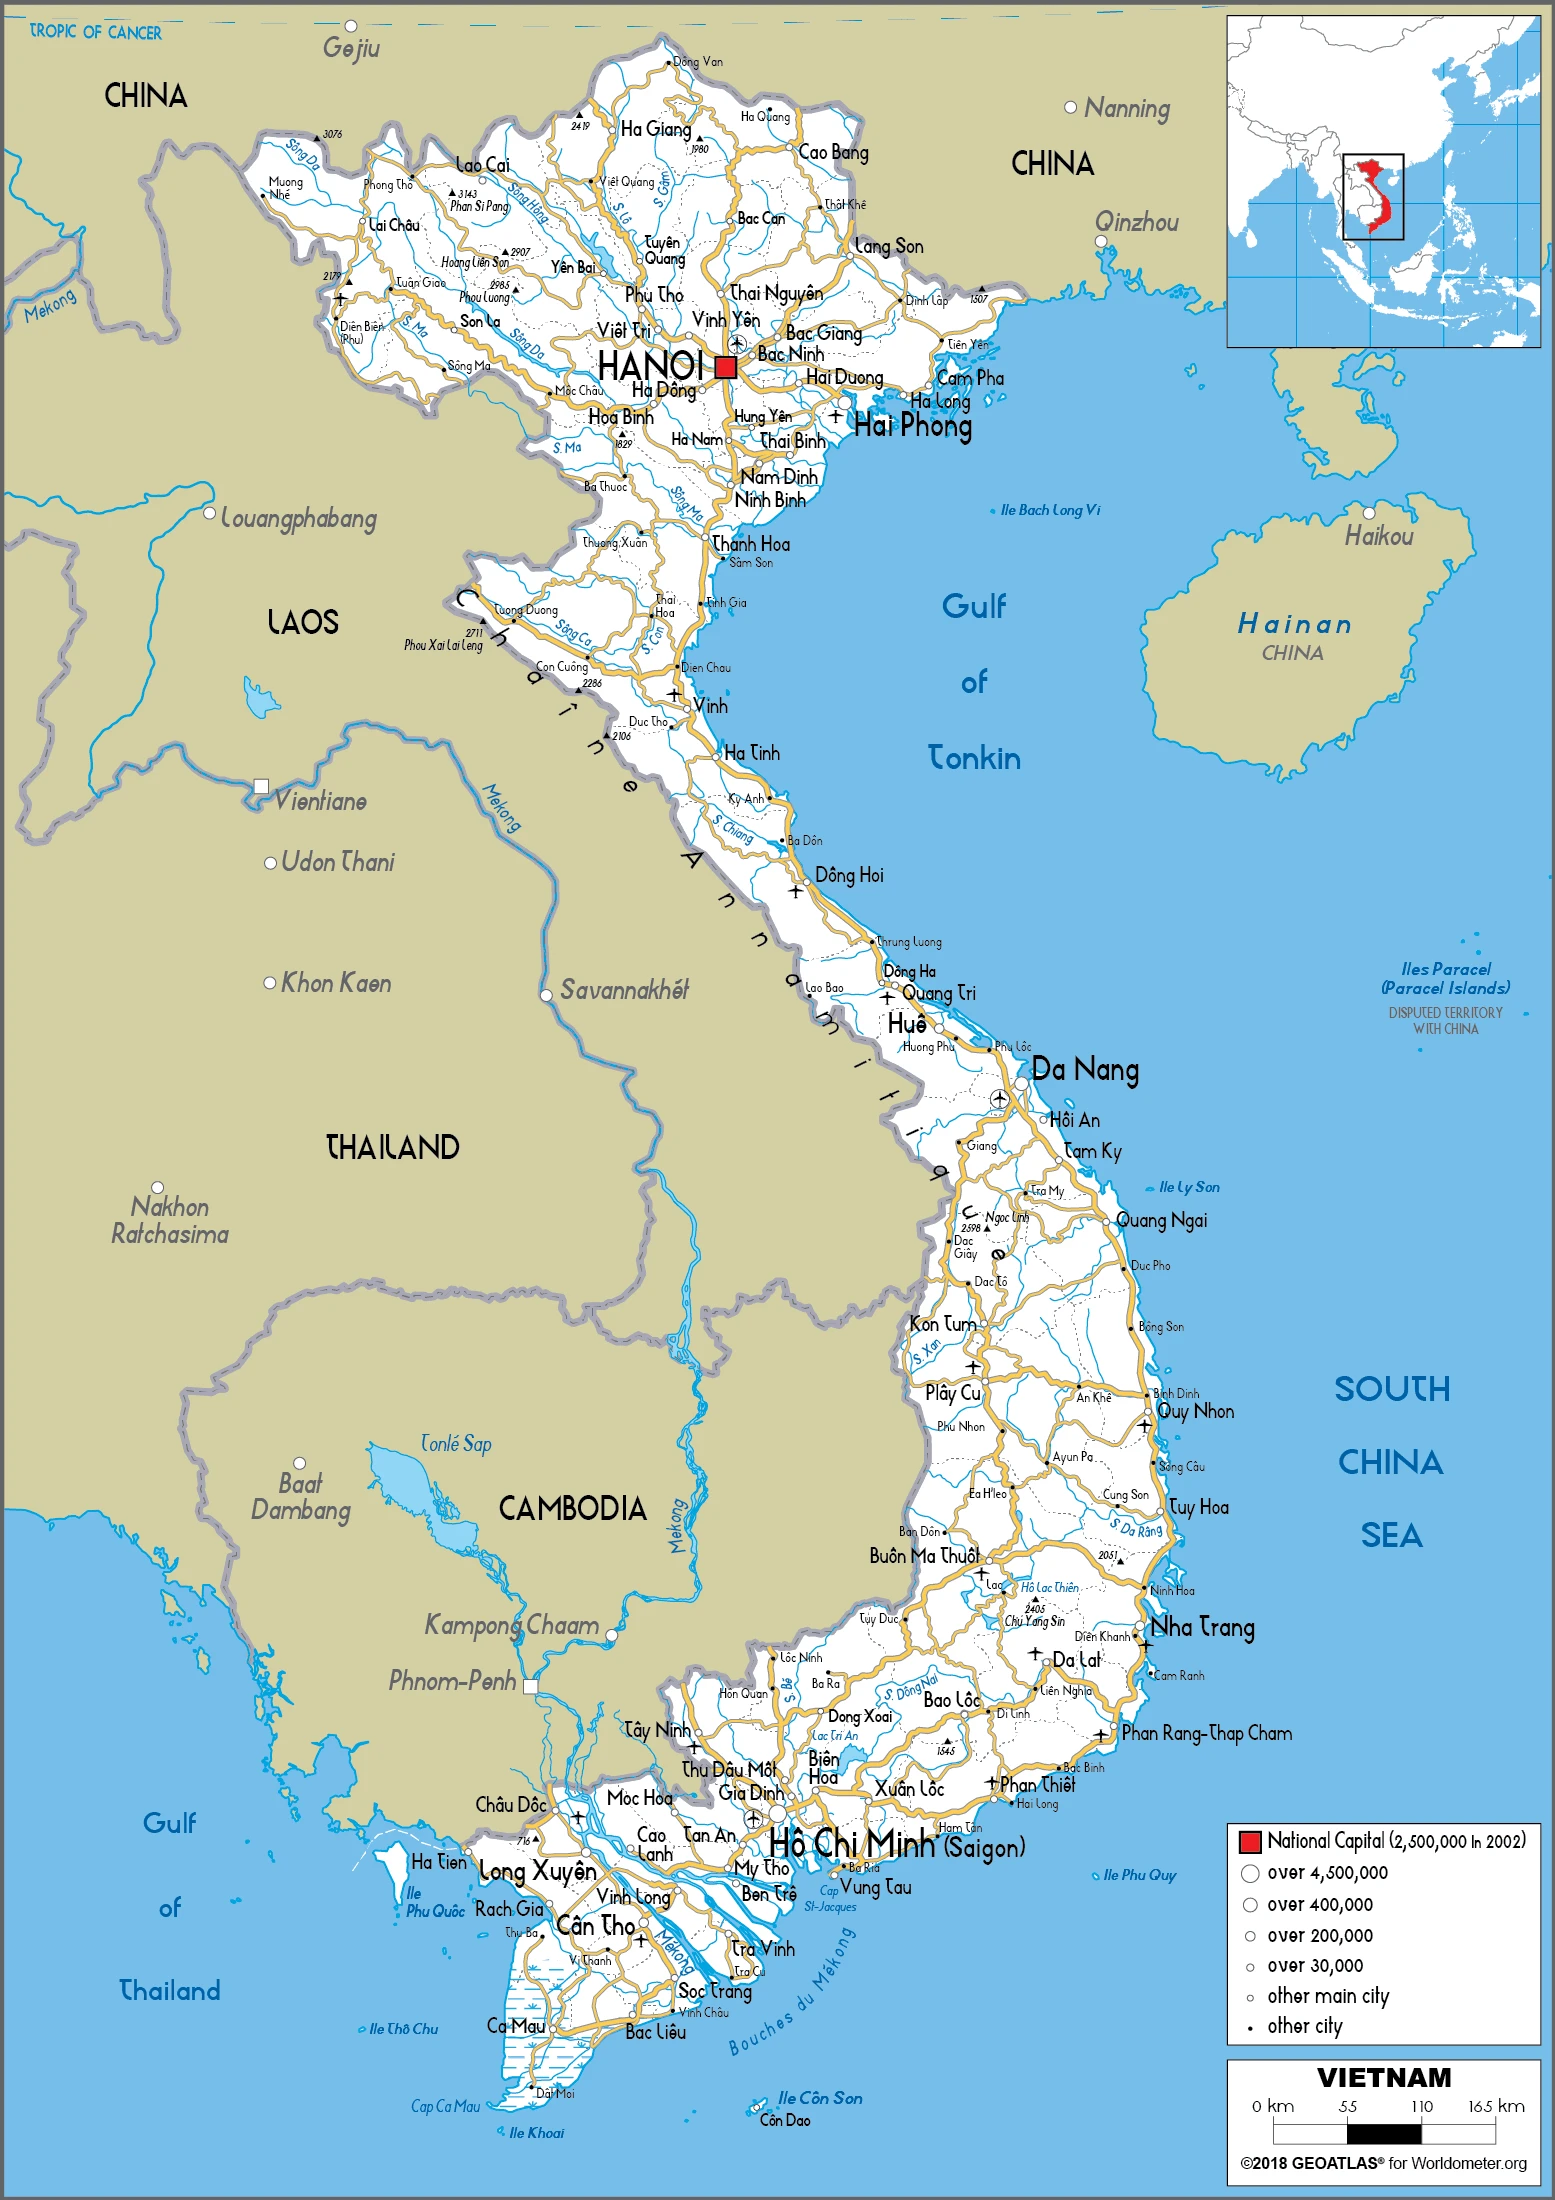 The route plan of the Vietnamese roadways.